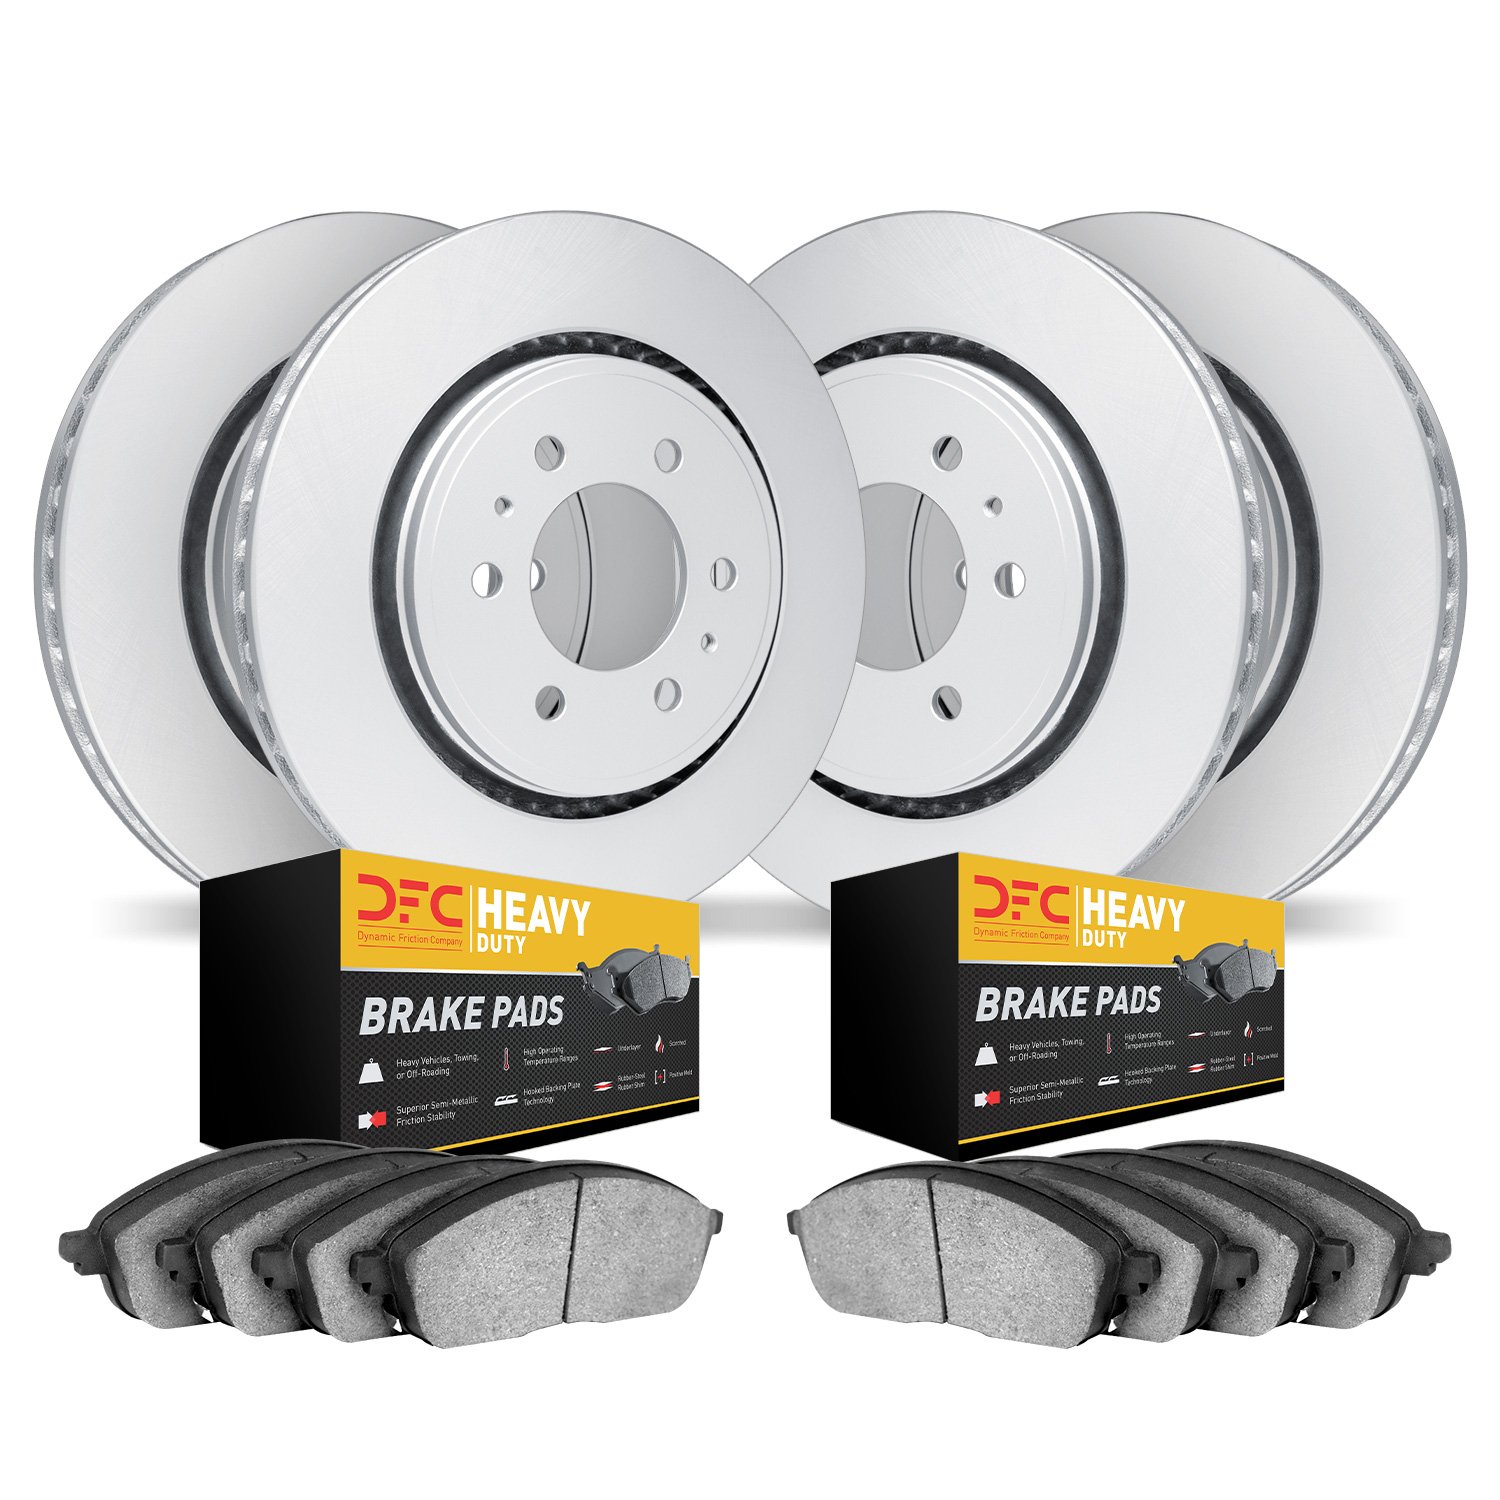 4204-54039 Geospec Brake Rotors w/Heavy-Duty Brake Pads Kit, 2004-2008 Ford/Lincoln/Mercury/Mazda, Position: Front and Rear